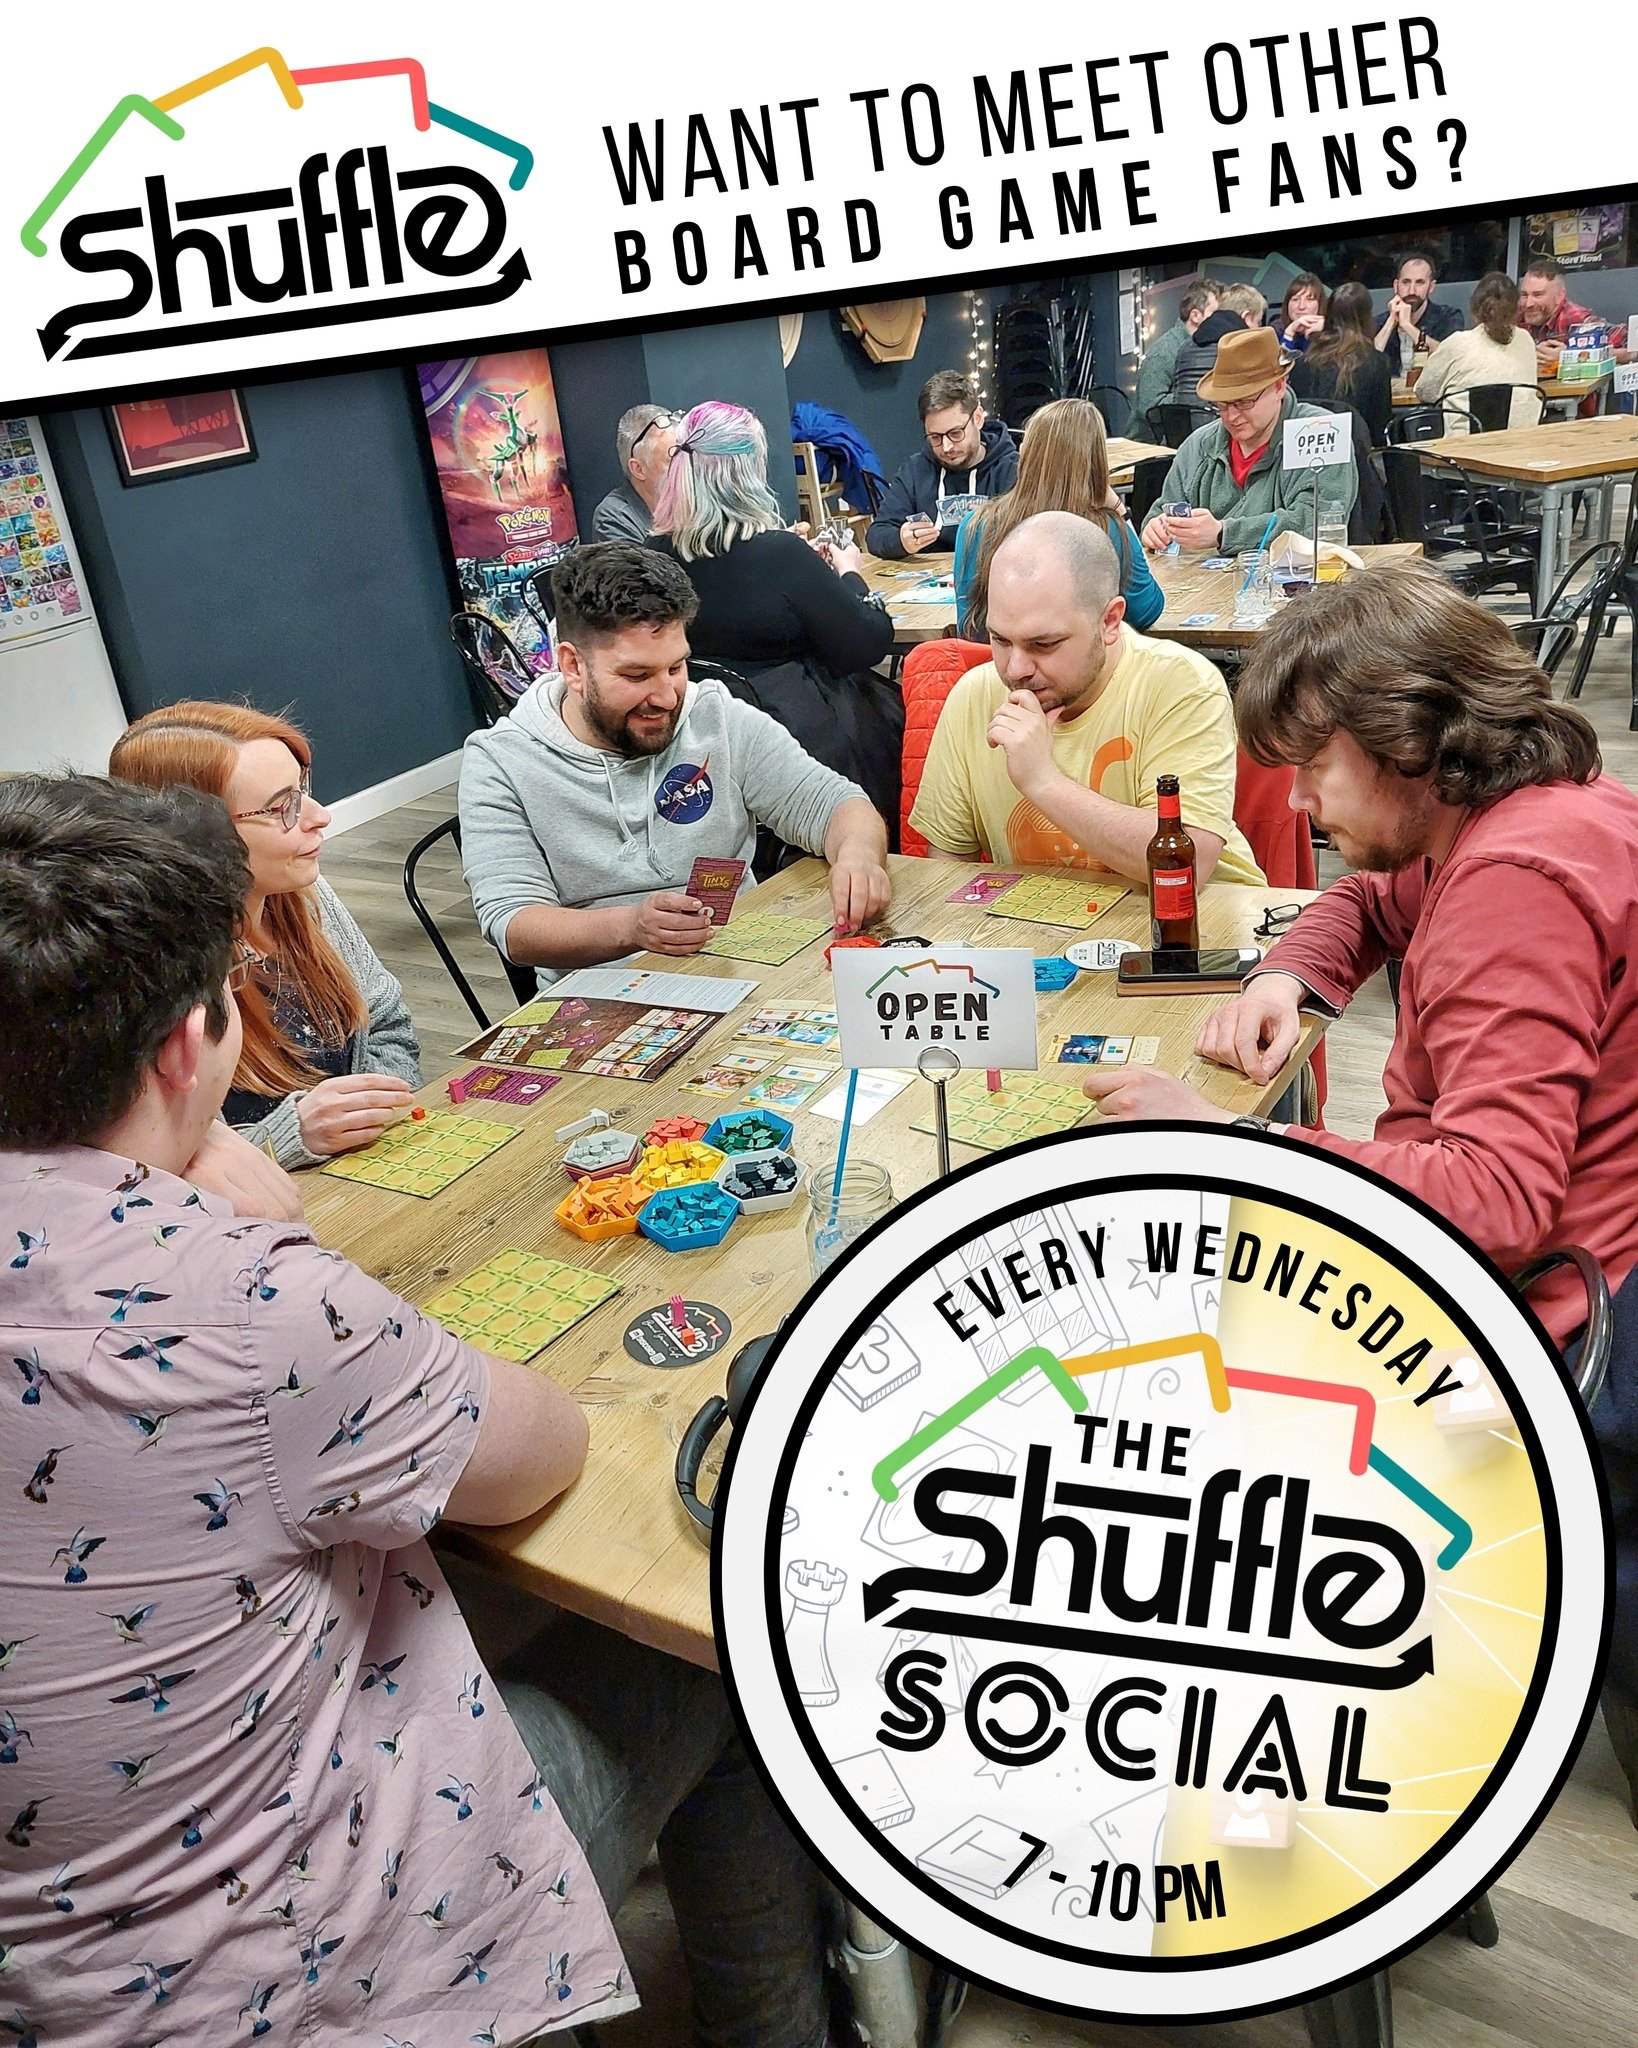 New to the Bury St Edmunds area? 🙋&zwj;♀️ Looking to meet new people? 🙋&zwj;♂️ Want to play board games with friendly folks who love games as much as you do?🙋🏾 If you answered &quot;Yes!&quot;, why not come along to The Shuffle Social every Wedne